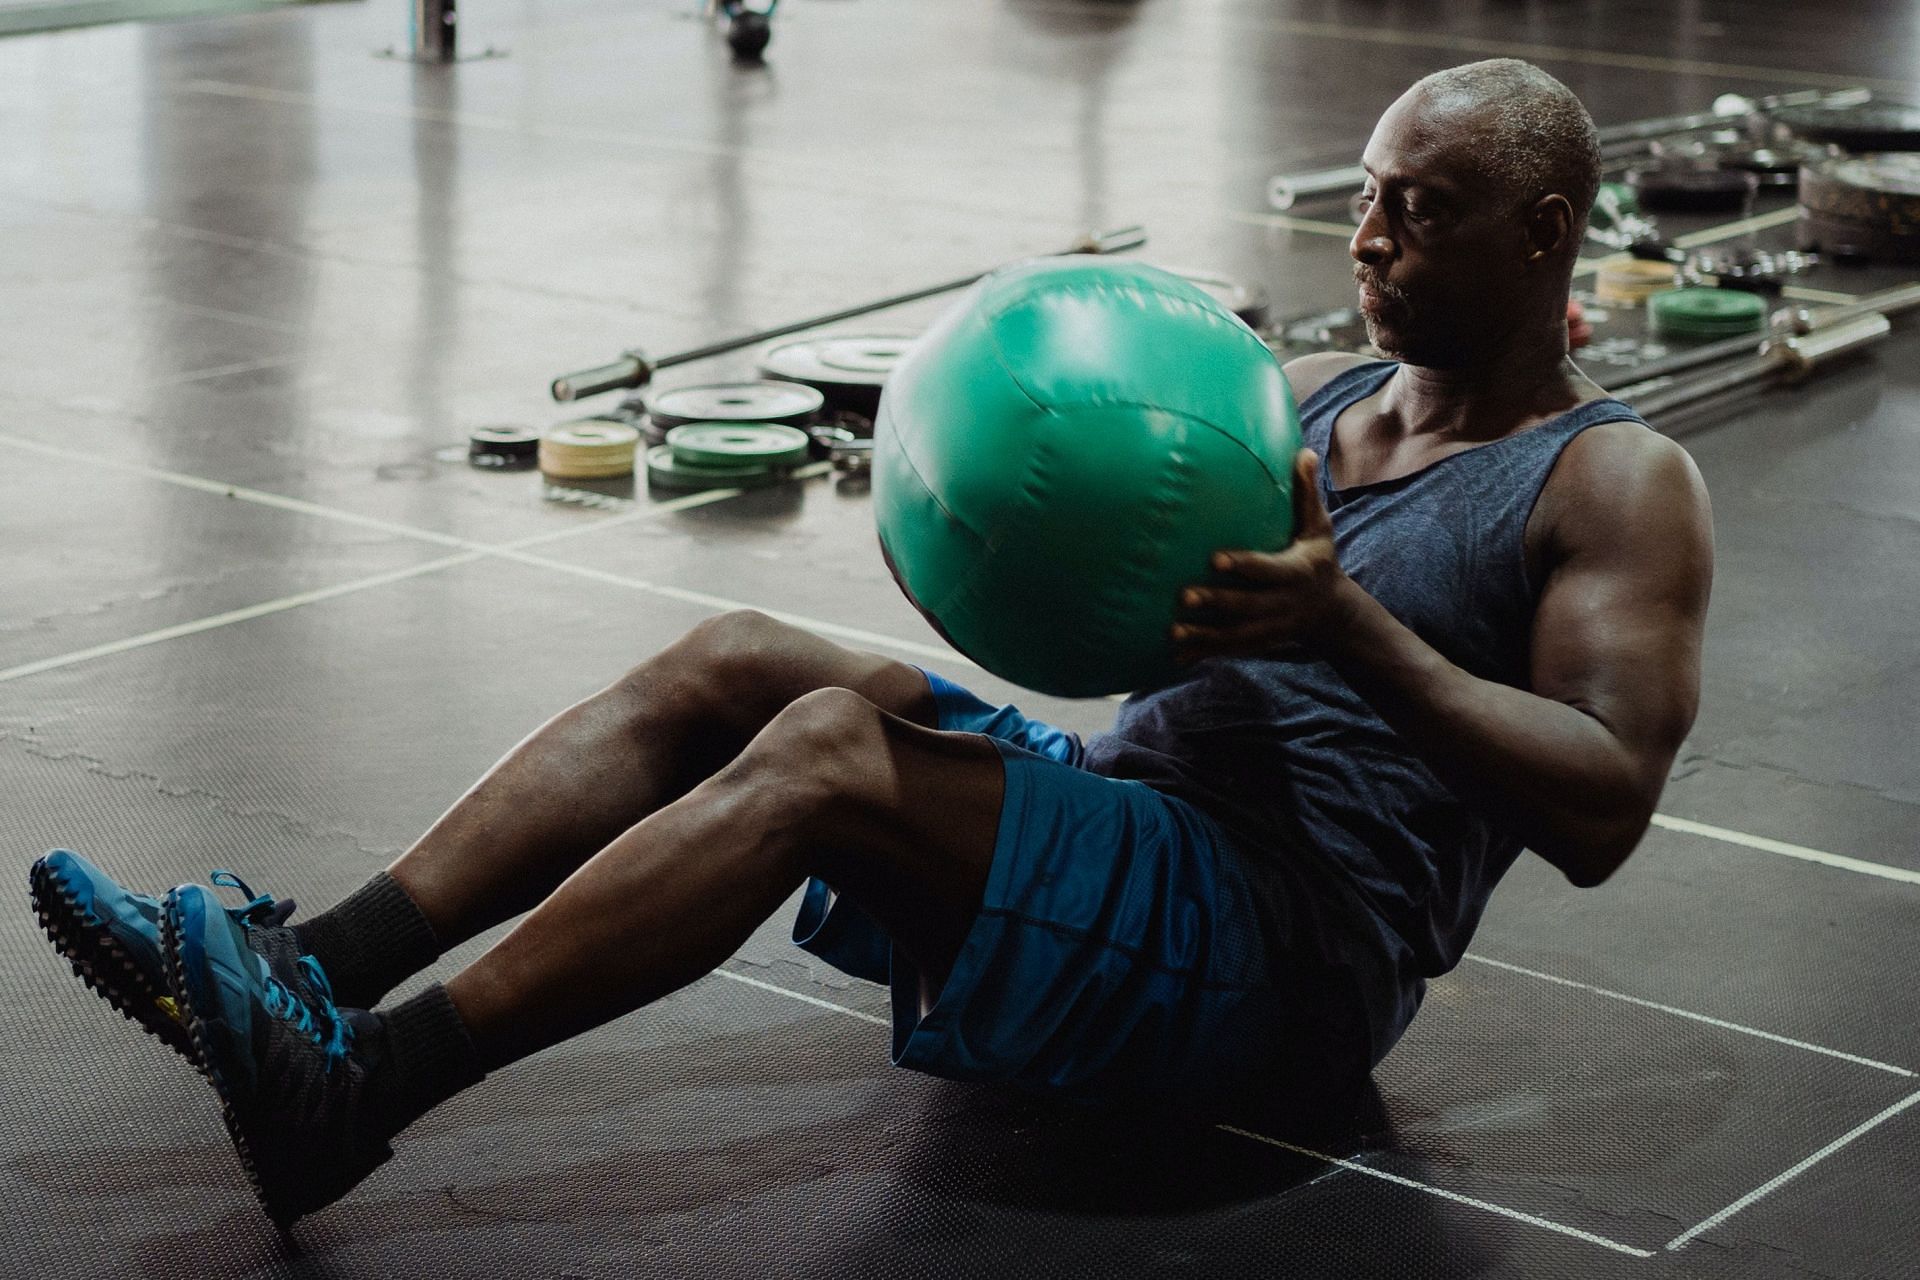 Russian twists are one of the best workouts for abs. (Image via Pexels/Ketut Subiyanto)